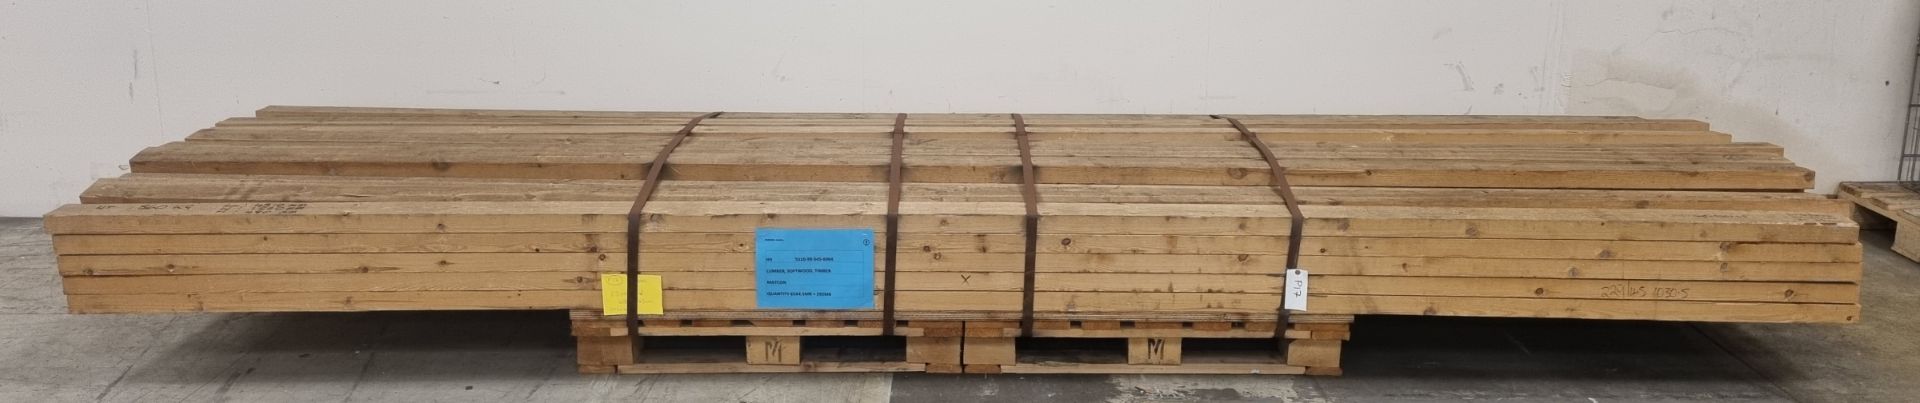 Pallet of 4"x2" (10x5cm) softwood, heat treated and debarked (GBFC-0452 DBHT) - L450cm - 65 pieces